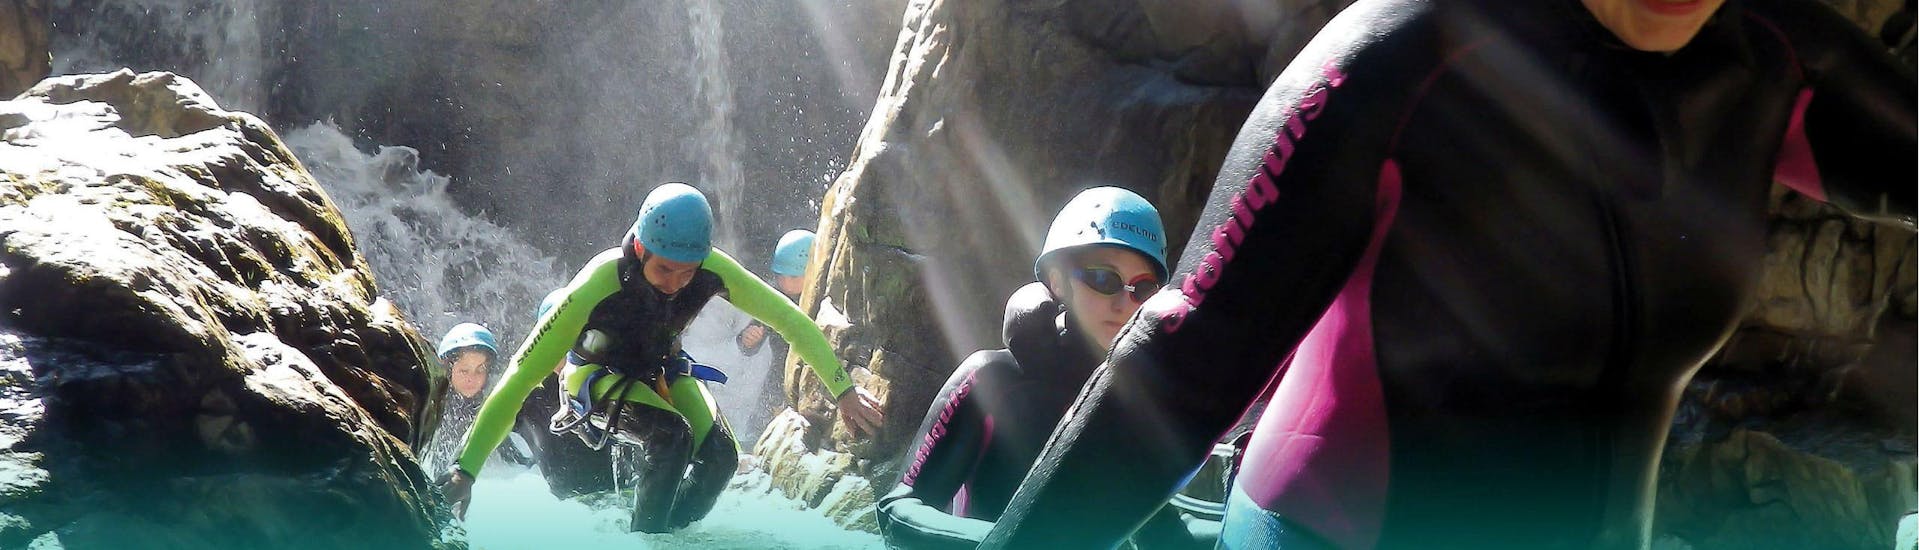 Gevorderde Canyoning in Ainet.